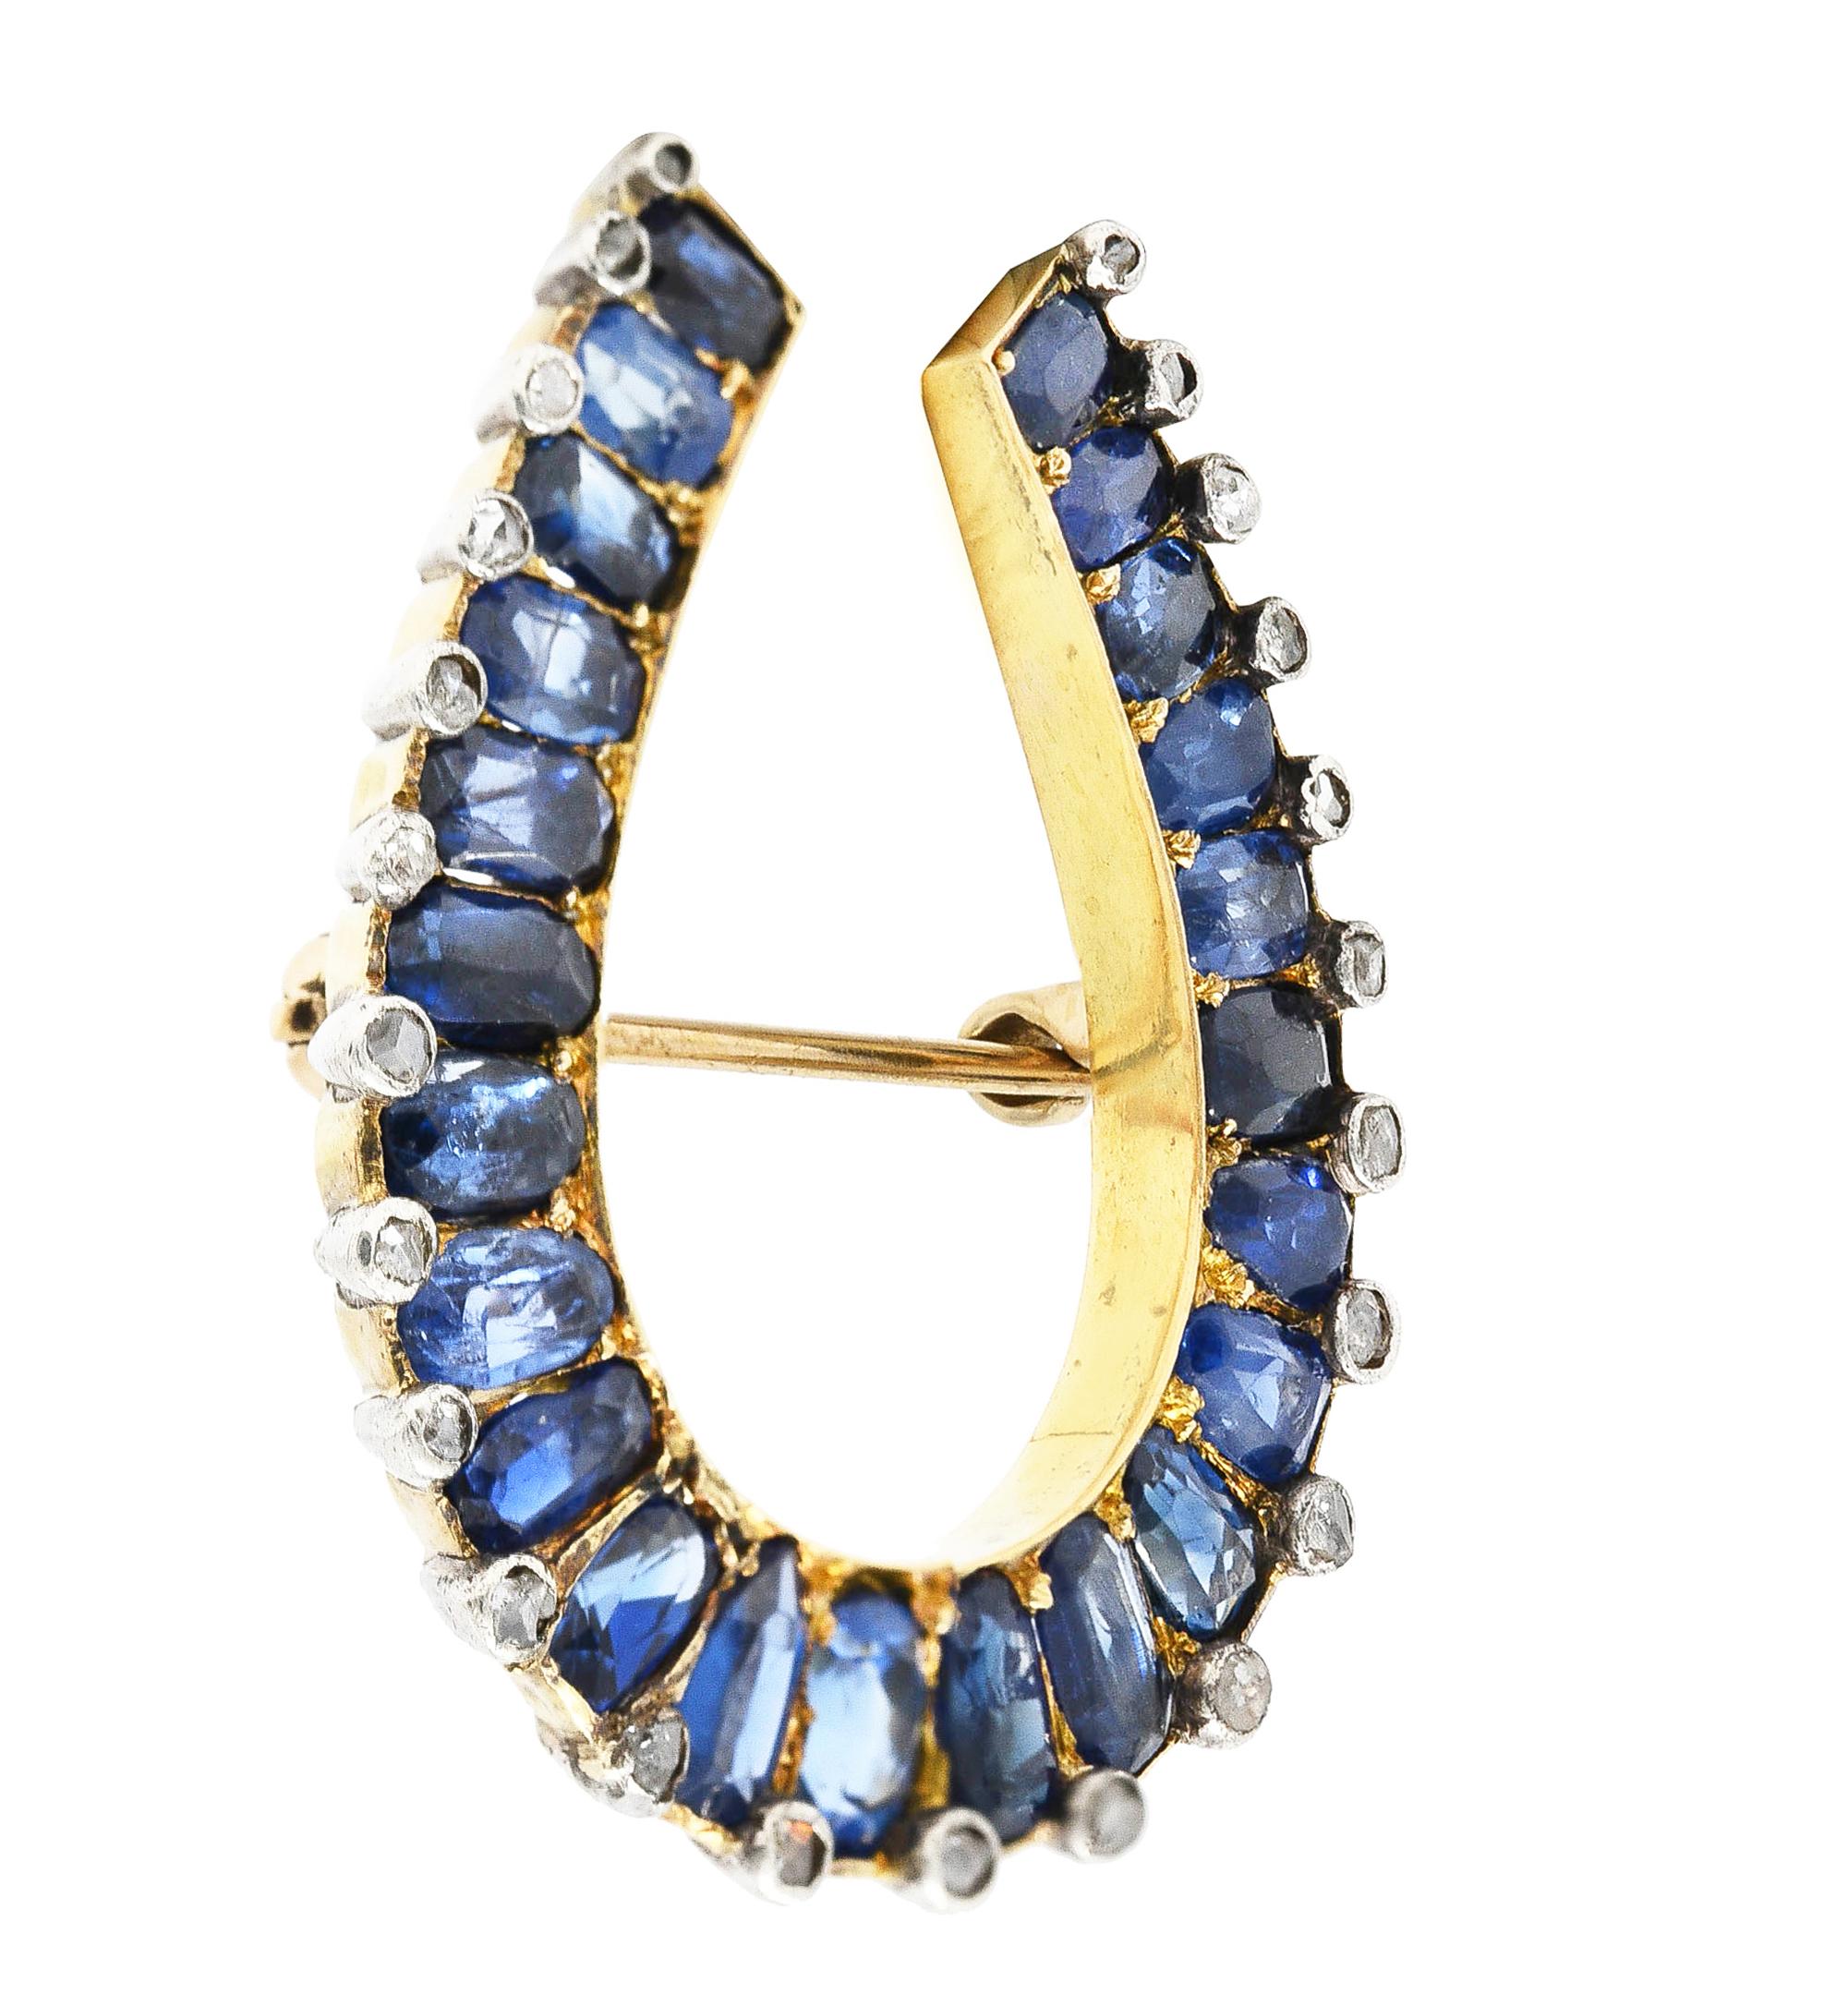 Designed as a horseshoe form with mixed oval cut sapphires bead set around. Weighing approximately 6.38 carats - transparent light to medium blue in color. Accented by rose cut diamonds set in silver bezels and weighing approximately 0.36 carat